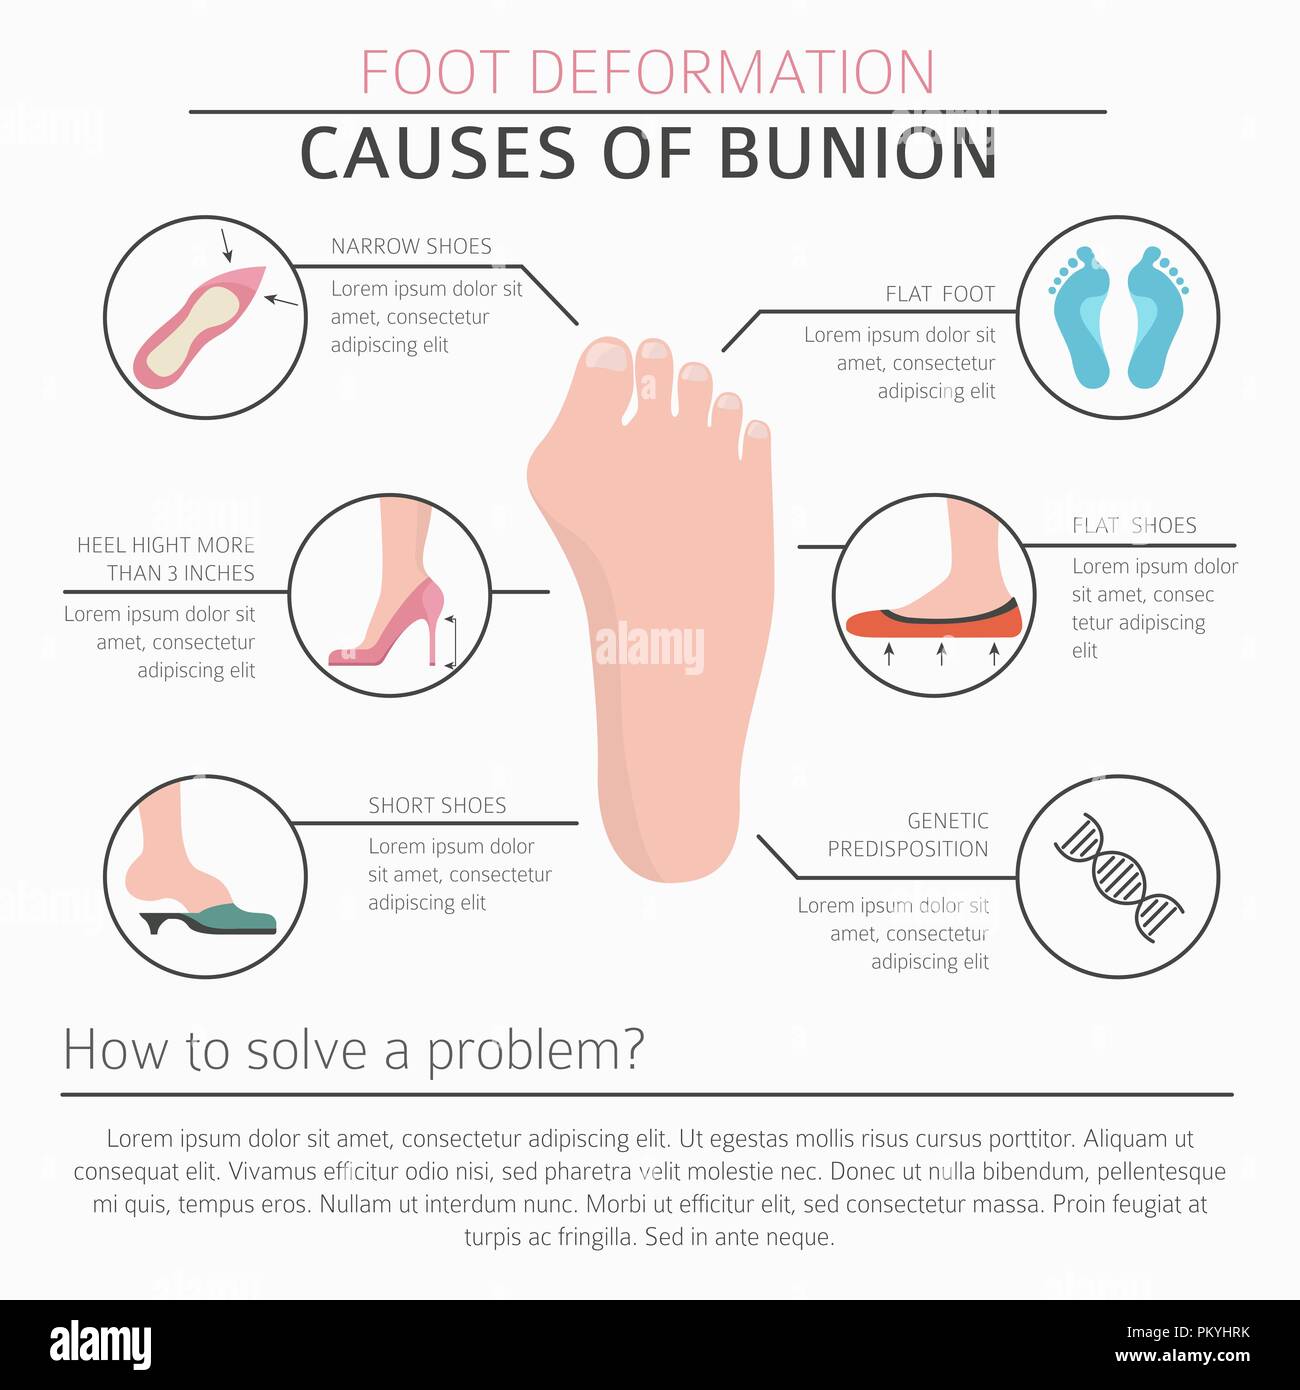 Foot deformation as medical desease infographic. Causes of bunion. Vector illustration Stock Vector